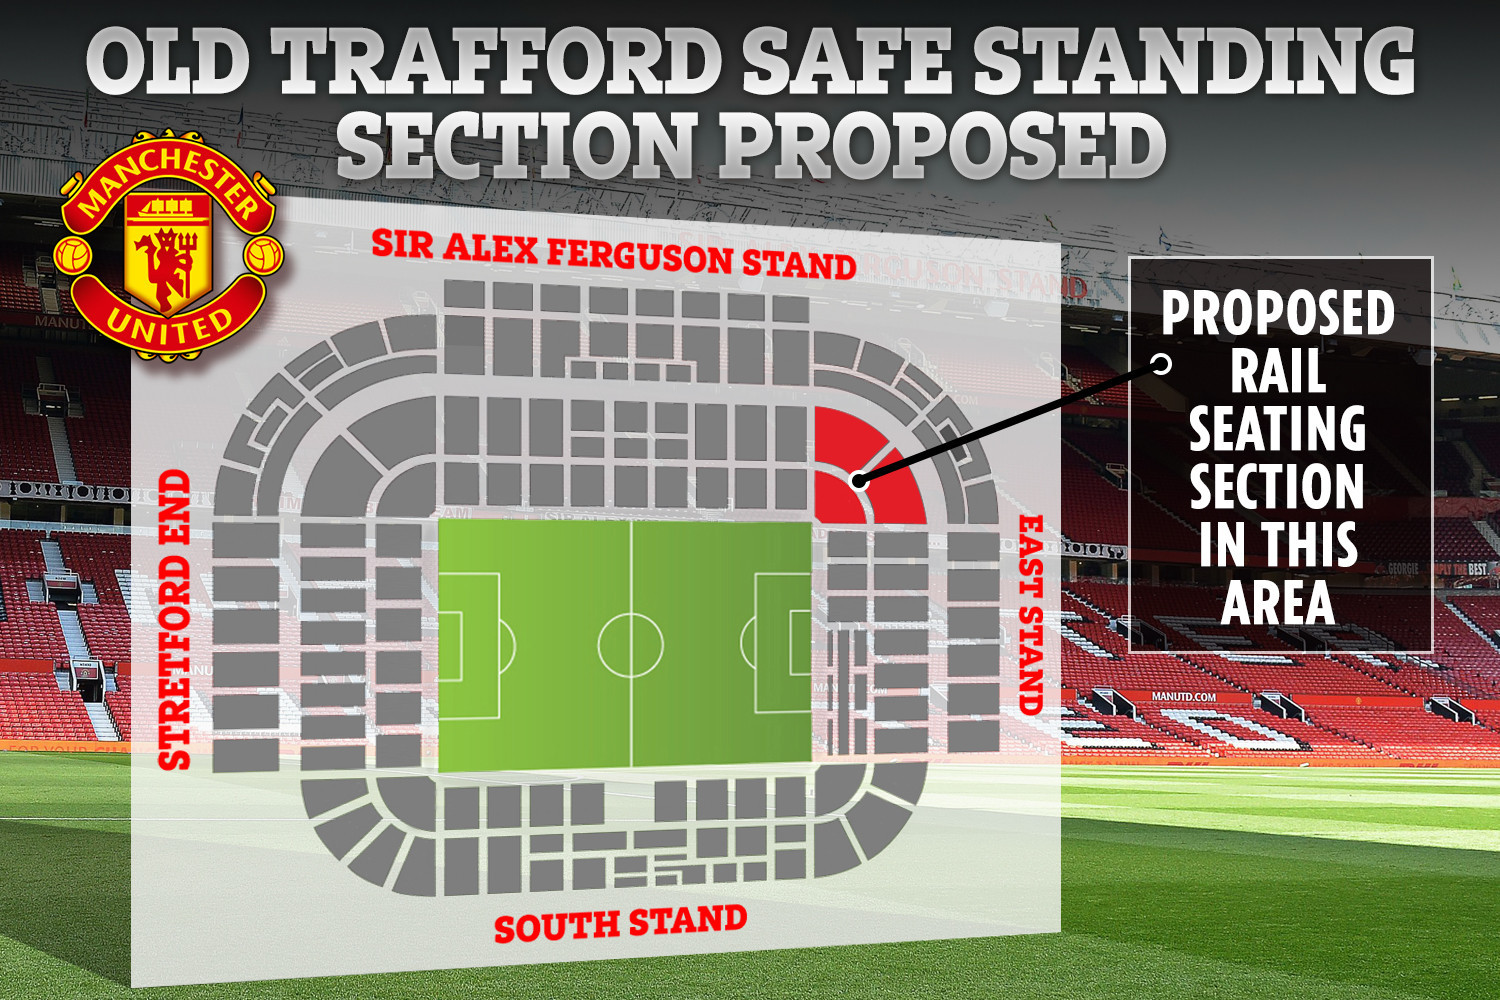 , Man Utd given approval for safe standing at Old Trafford for 1,500 fans with view of full Premier League rollout